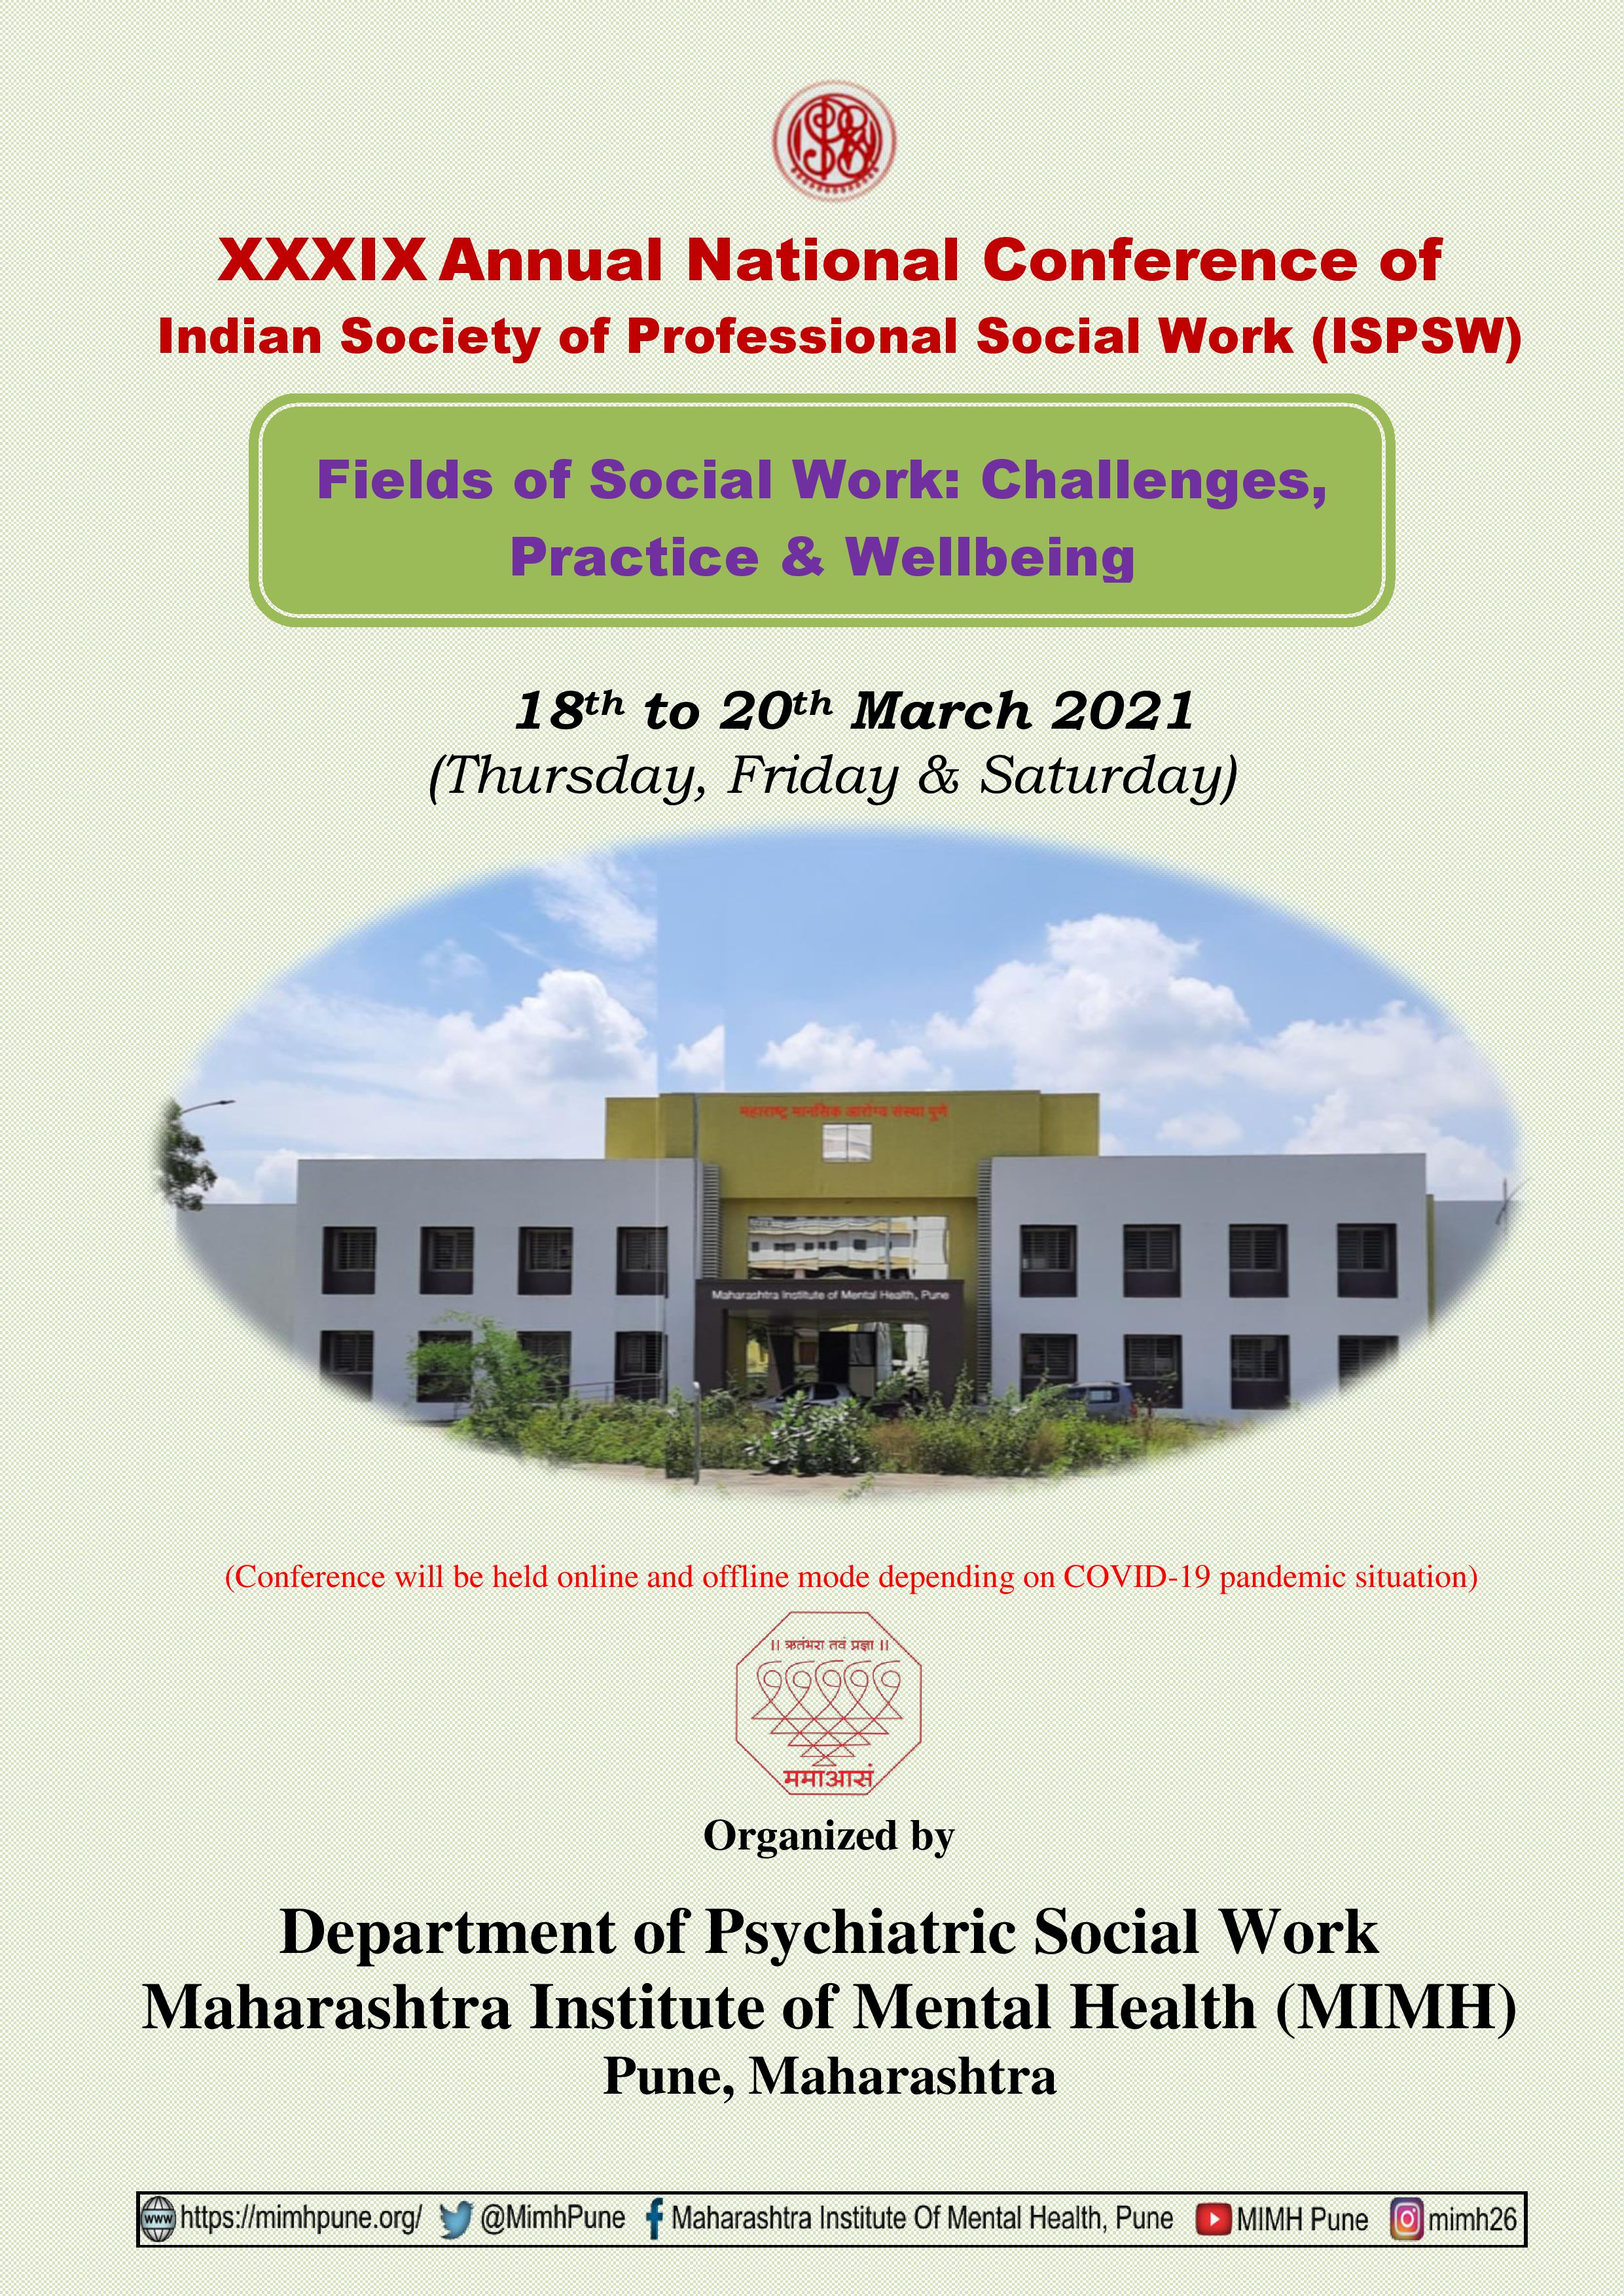 					View XXXIX Annual National Conference of ISPSW
				